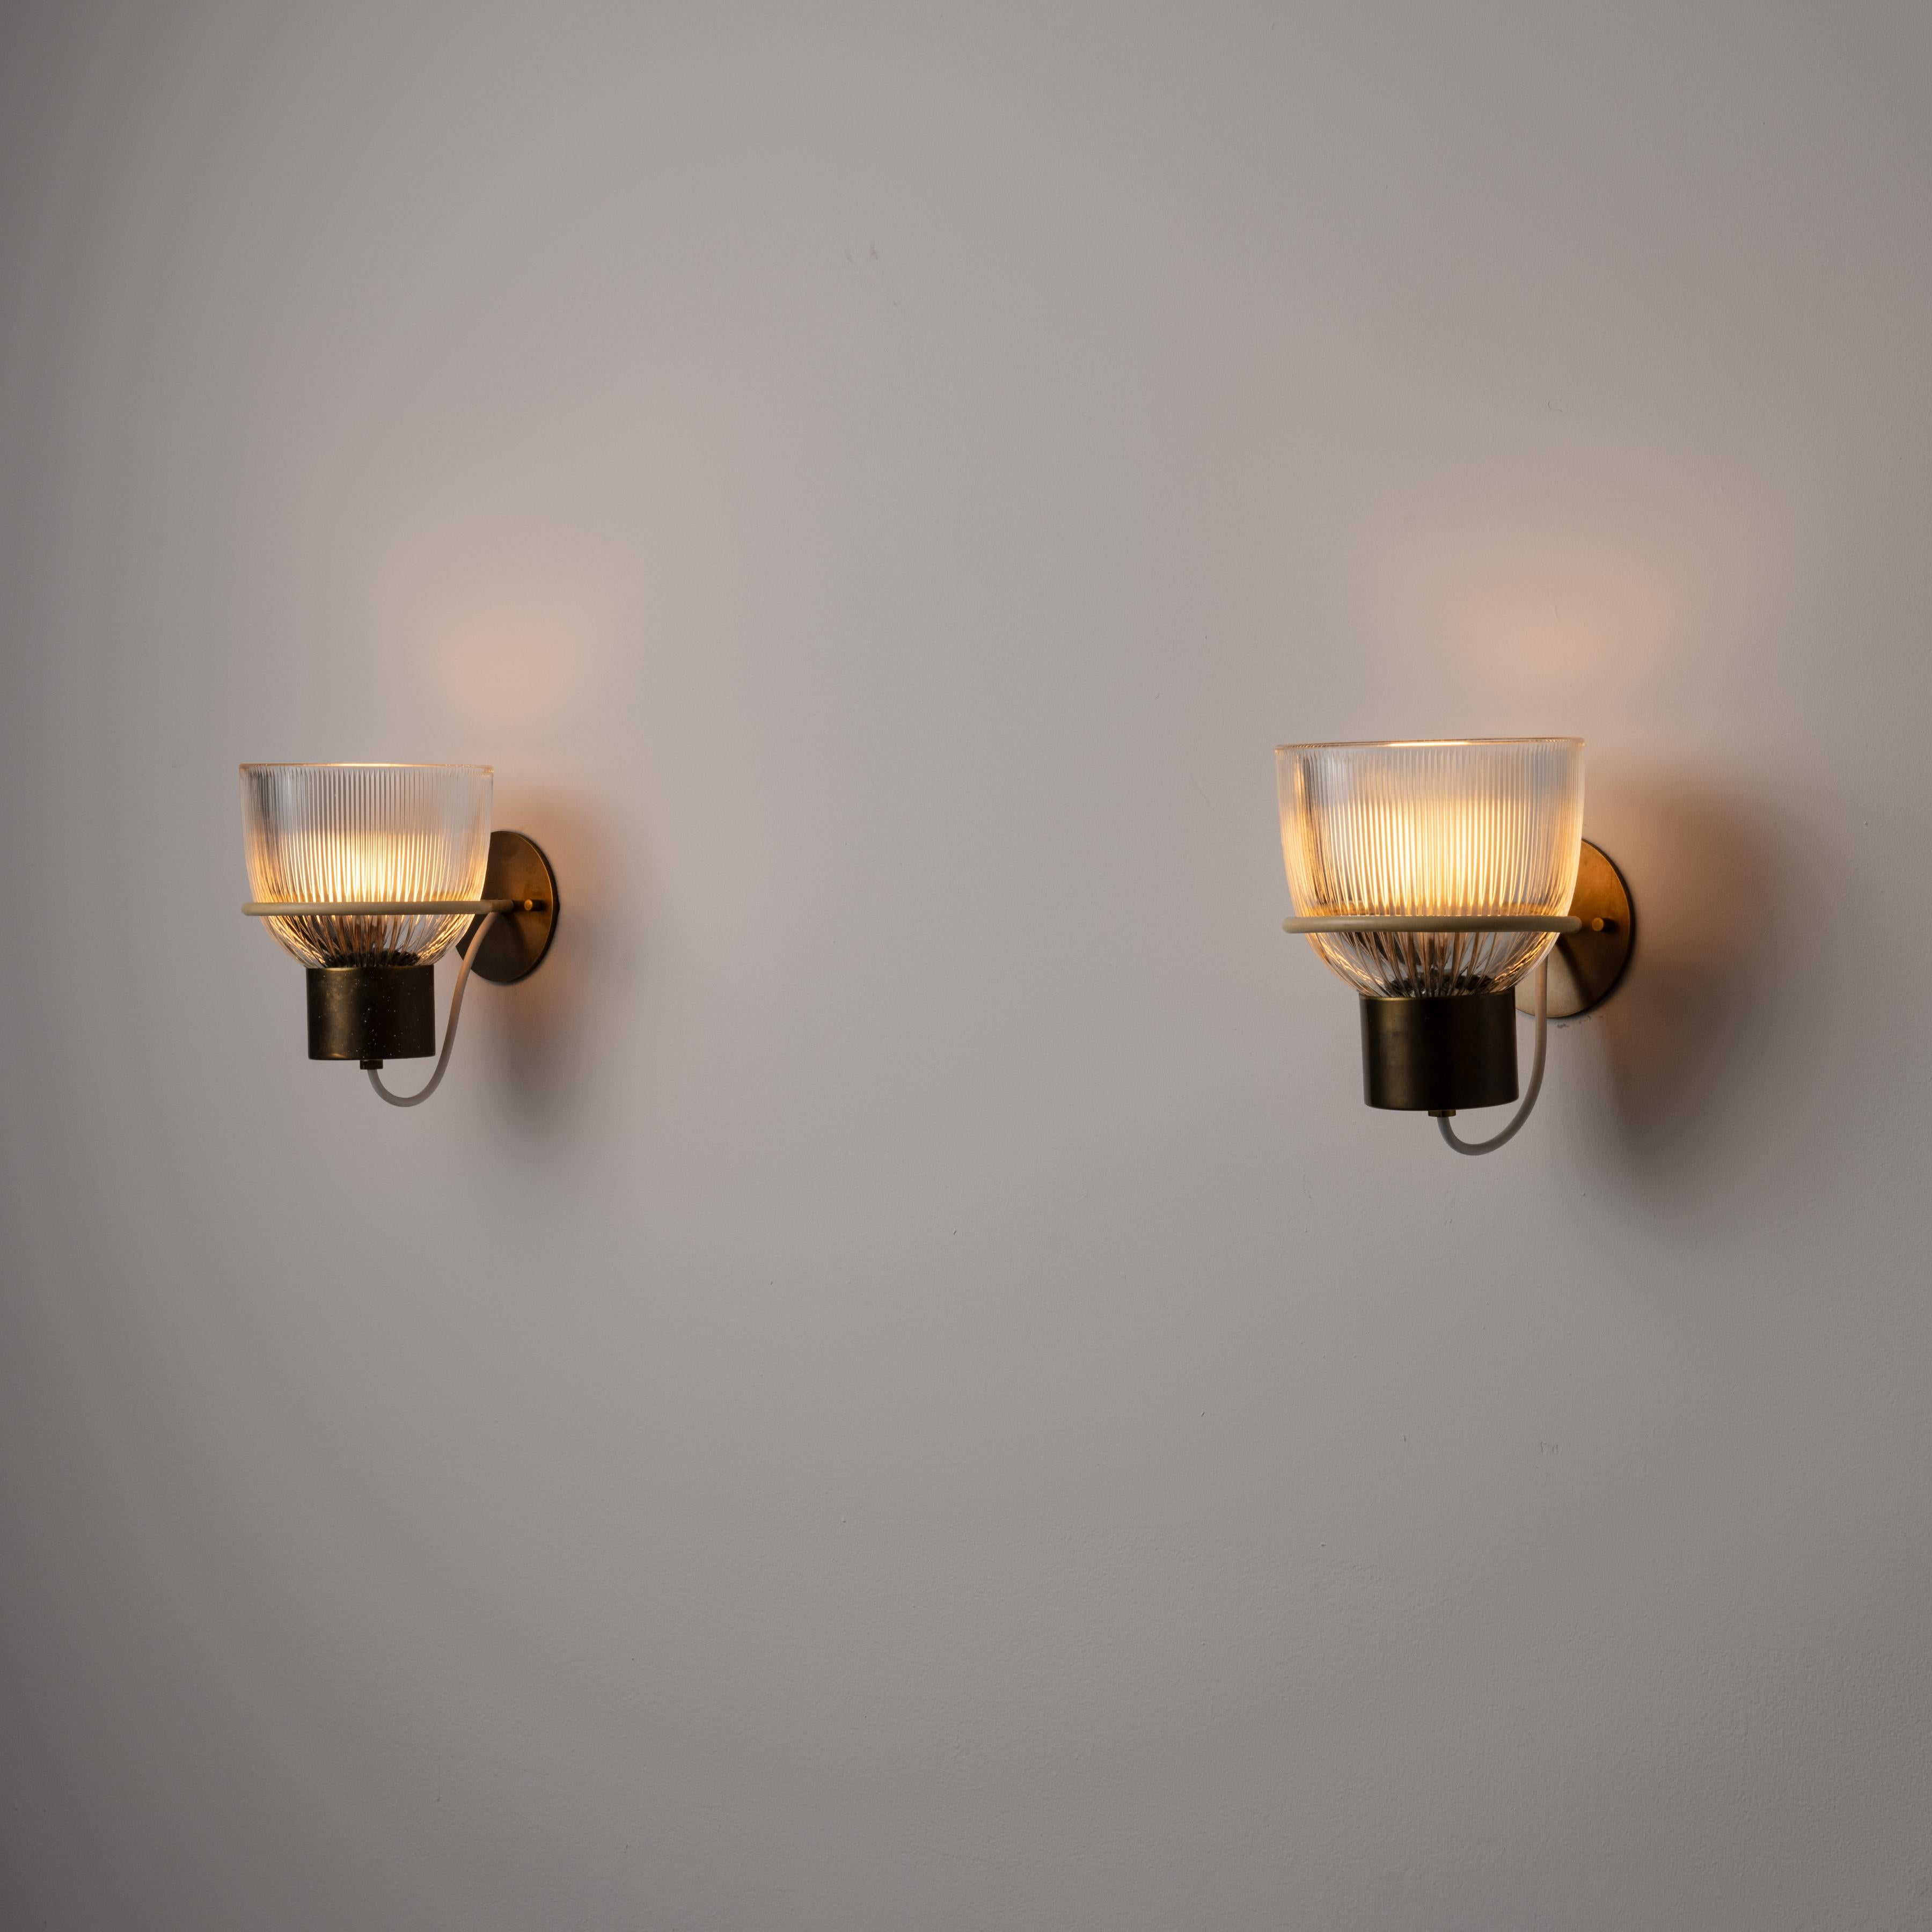 Pair of Model 1112 Sconces by Tito Agnoli for Oluce. Designed and manufactured in Italy, in 1959. Bell shaped sconces with brass frame and detailing and custom reeded glass diffusers. The sconces are held upright by an enameled hoop that is adhered